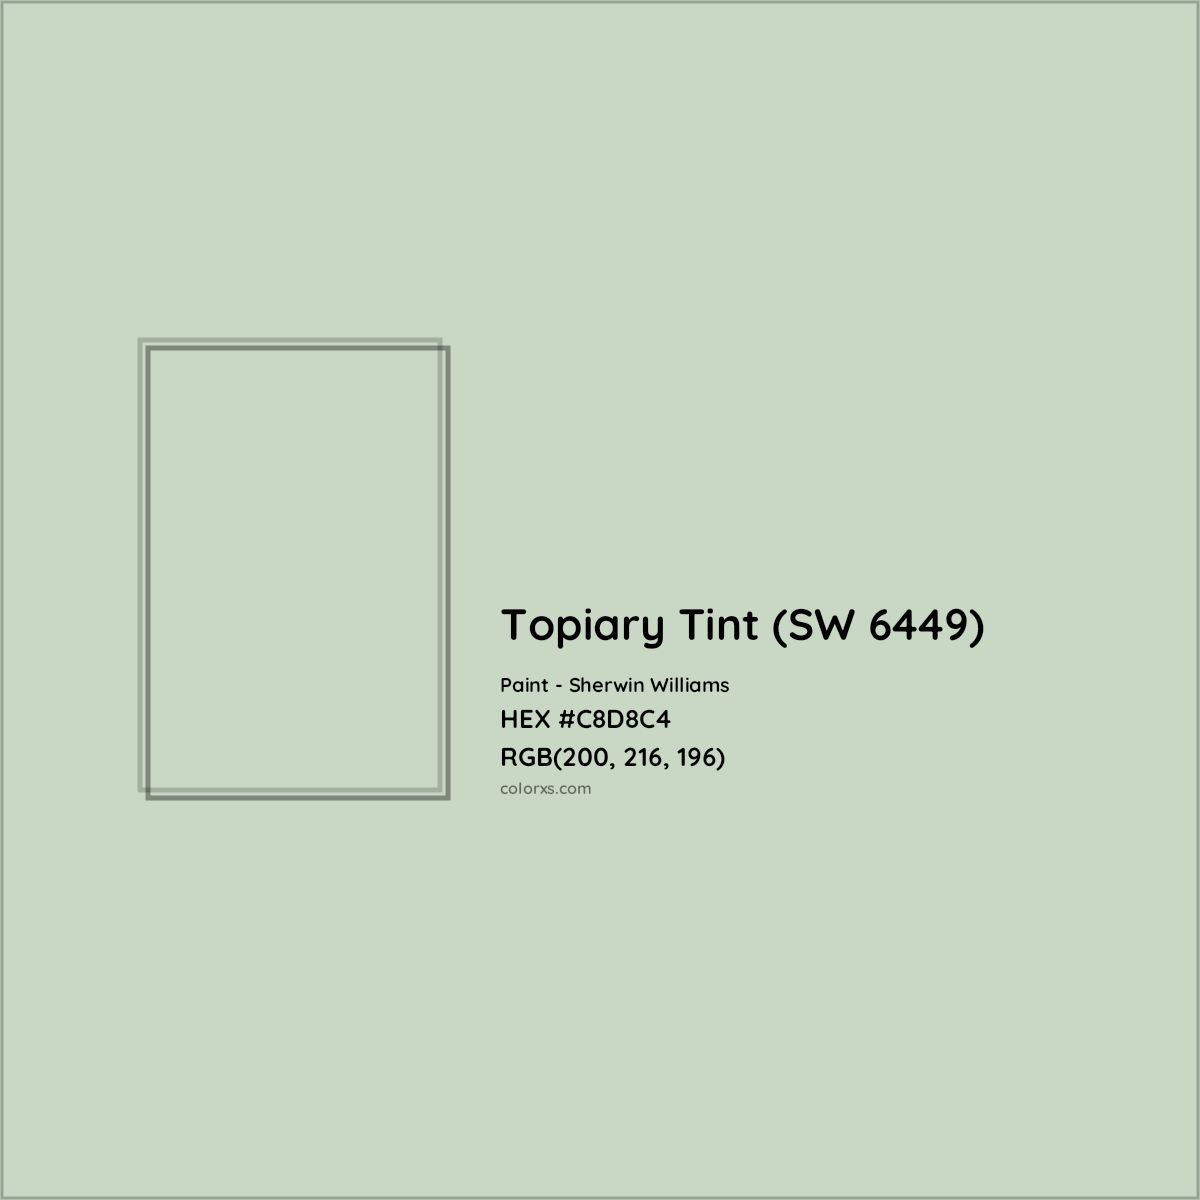 HEX #C8D8C4 Topiary Tint (SW 6449) Paint Sherwin Williams - Color Code